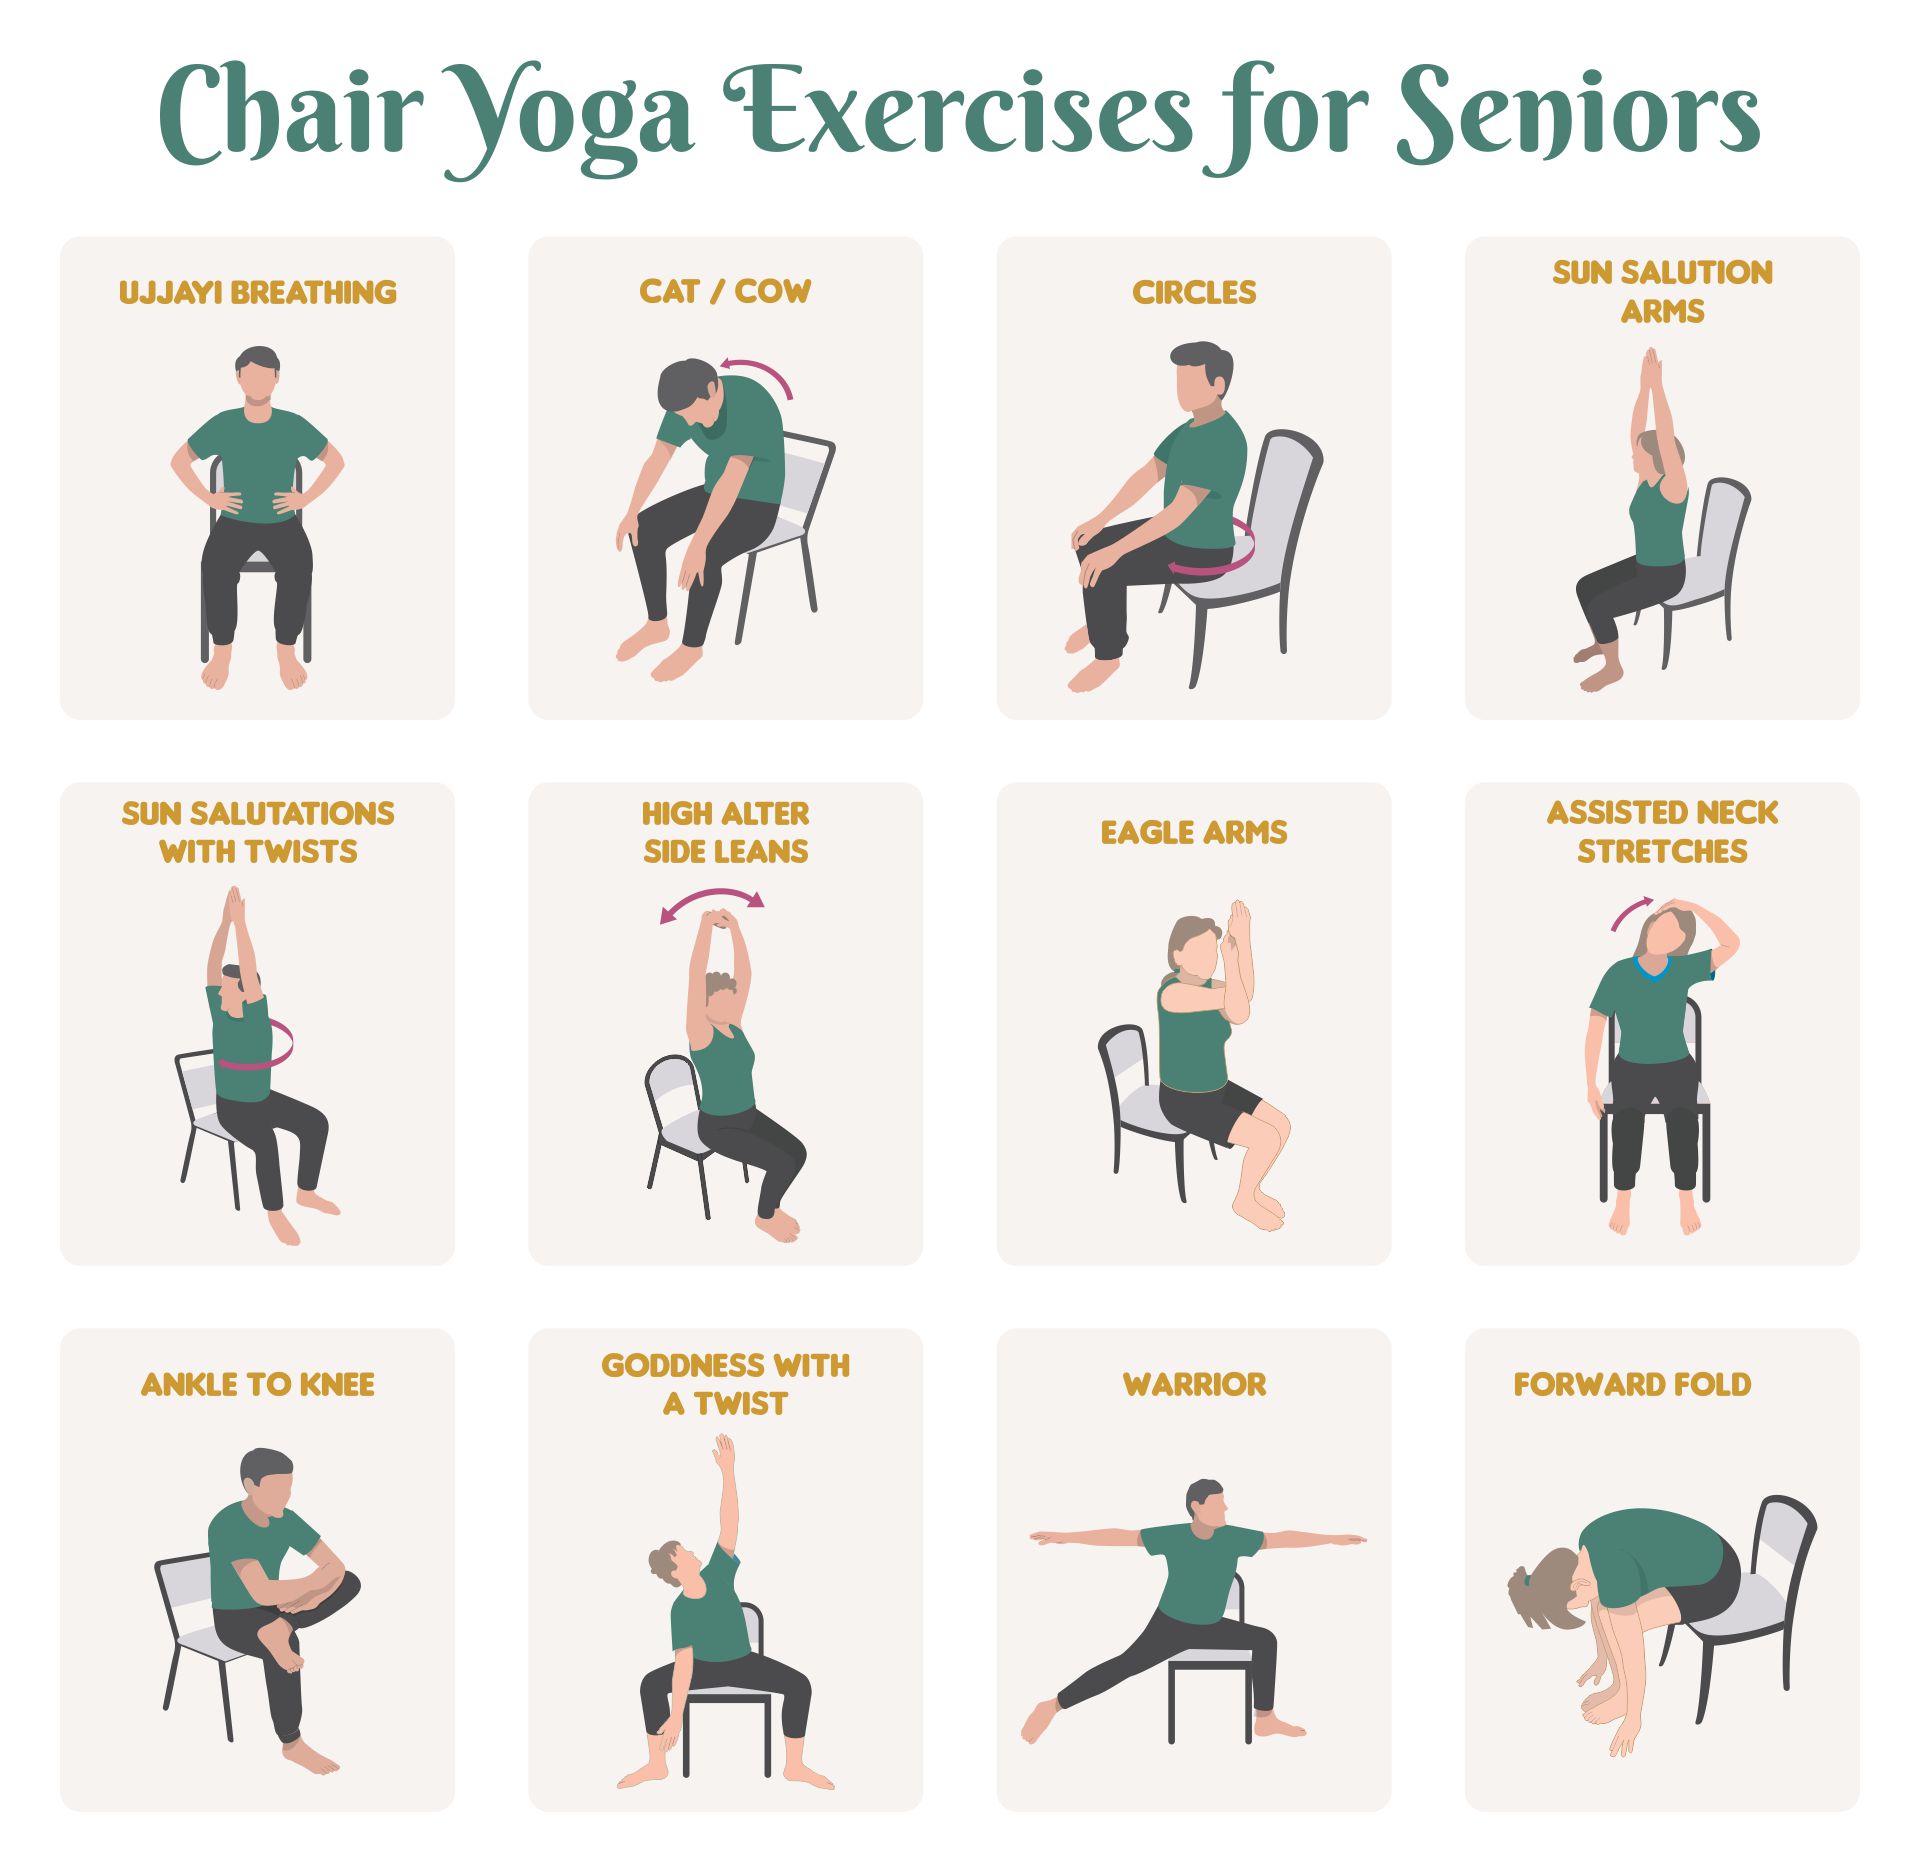 7 Best Images of Printable Chair Yoga Exercises For Seniors Printable